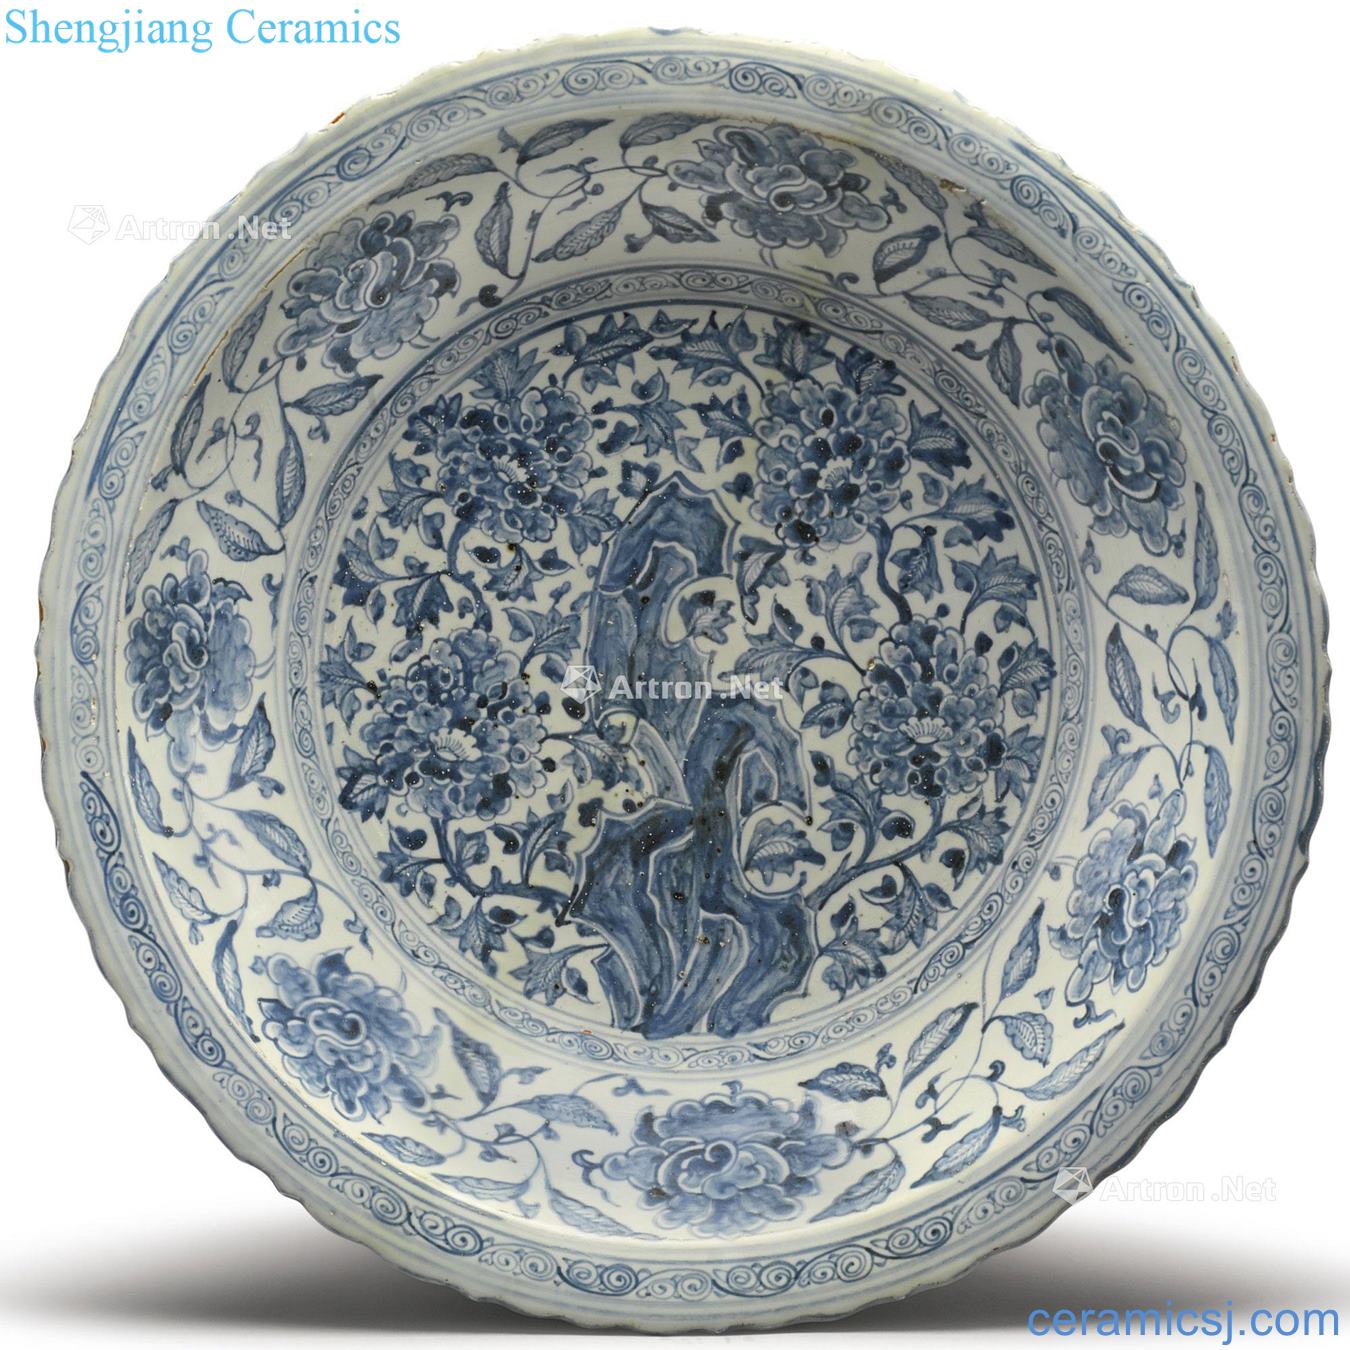 The 15th/16th century Blue and white peony, stone mouth tray